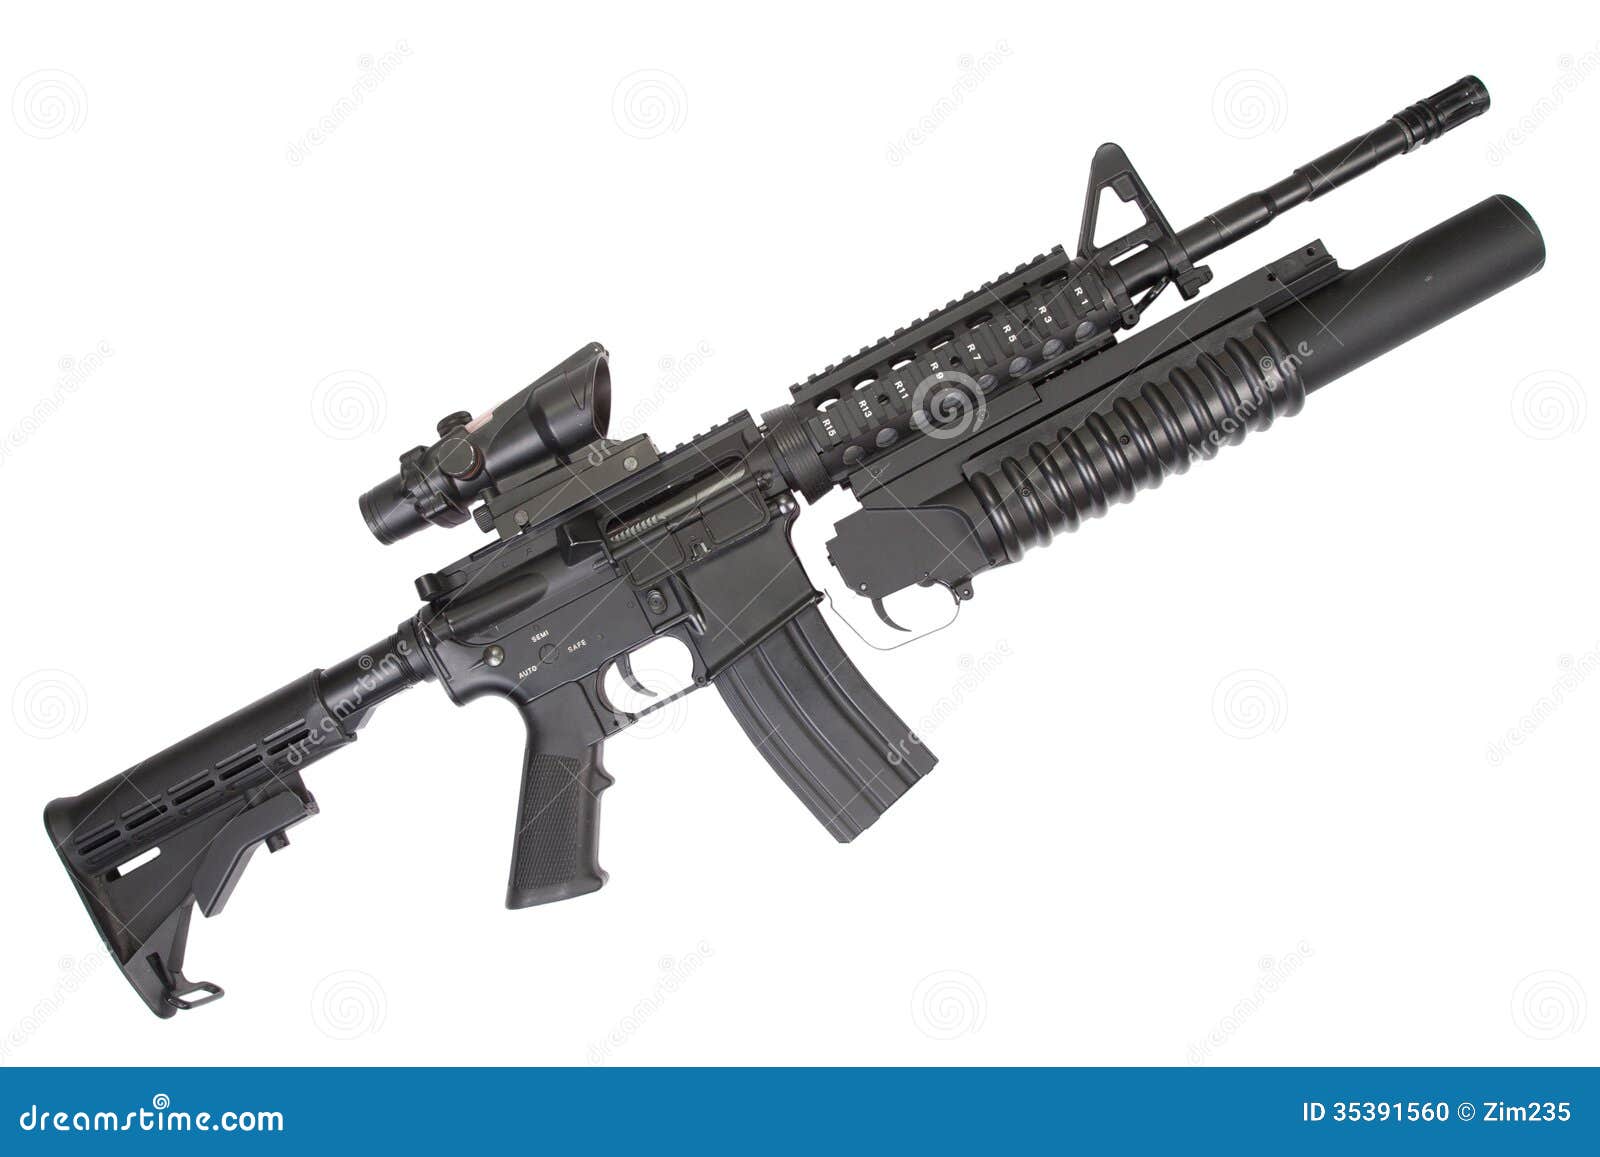 an m4a1 carbine equipped with an m203 grenade launcher